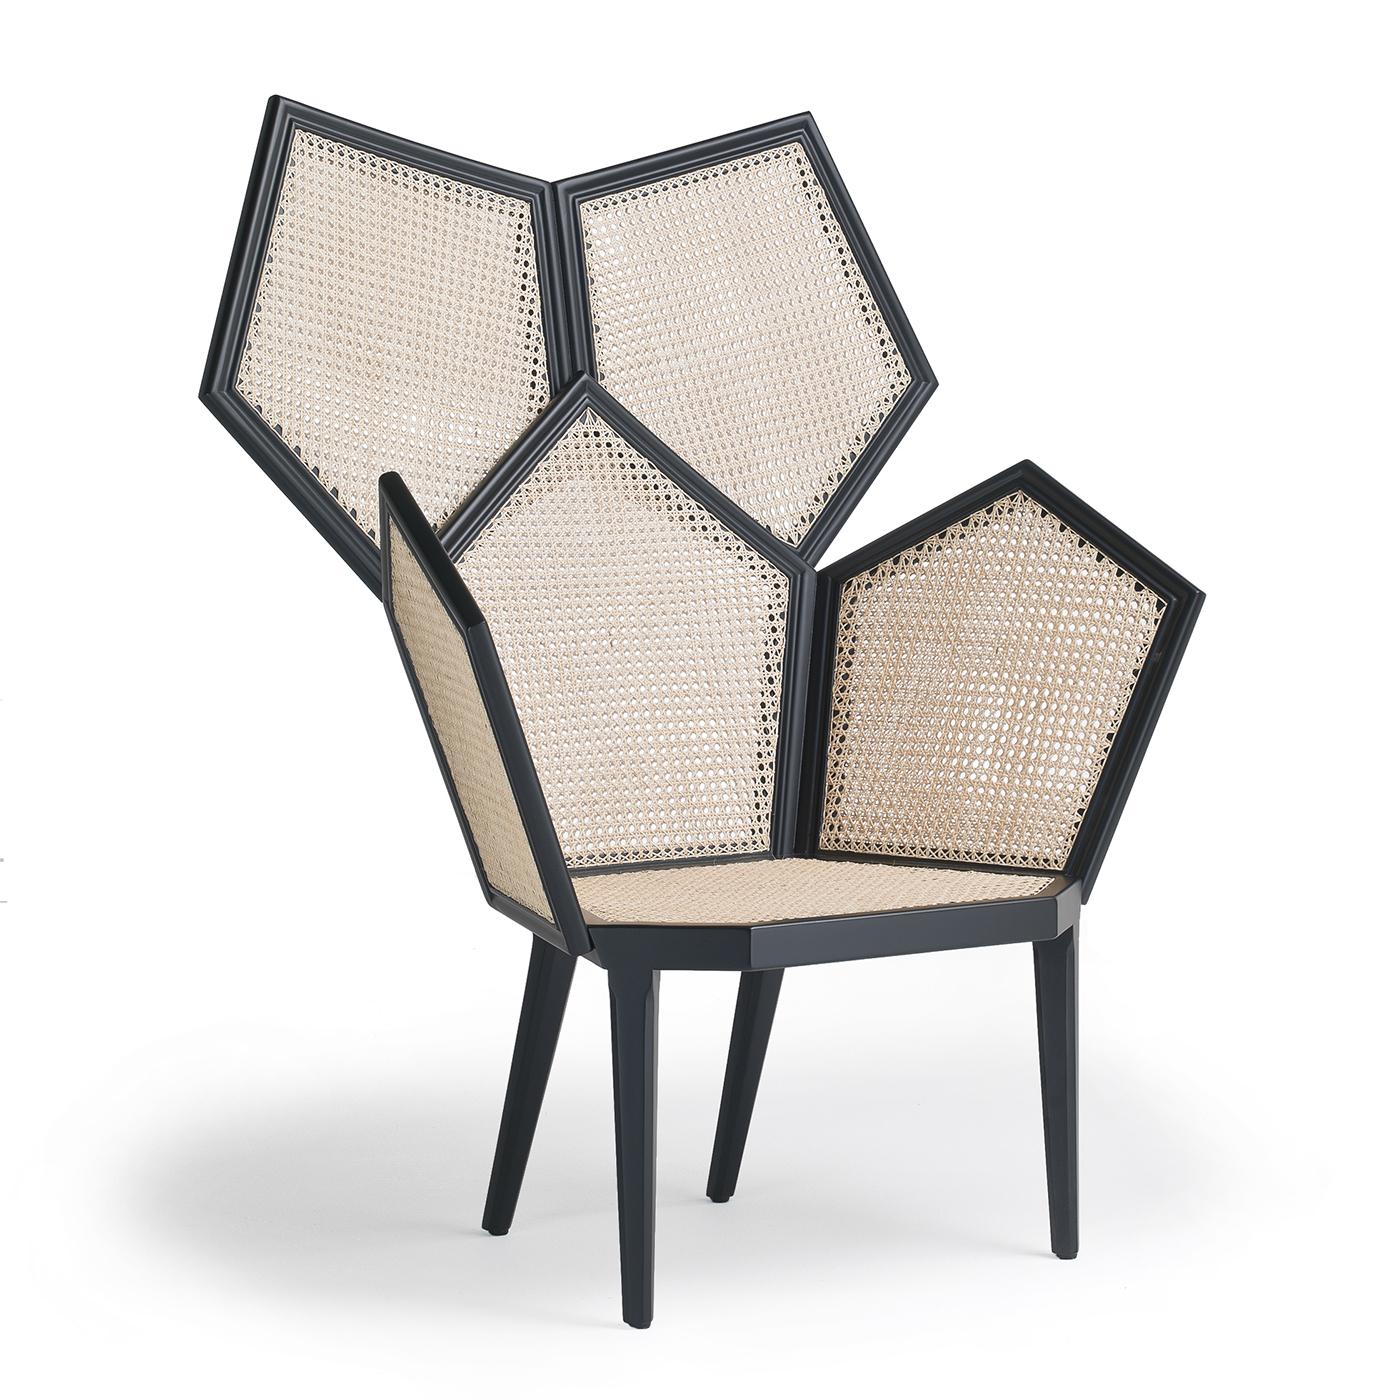 Part of the Lui collection of stunning modular armchairs, this piece celebrates the rigor and harmony of geometry with a unique structure in matte black lacquered wood that uses the pentagon as a primary element. From the pentagonal seat (40 cm